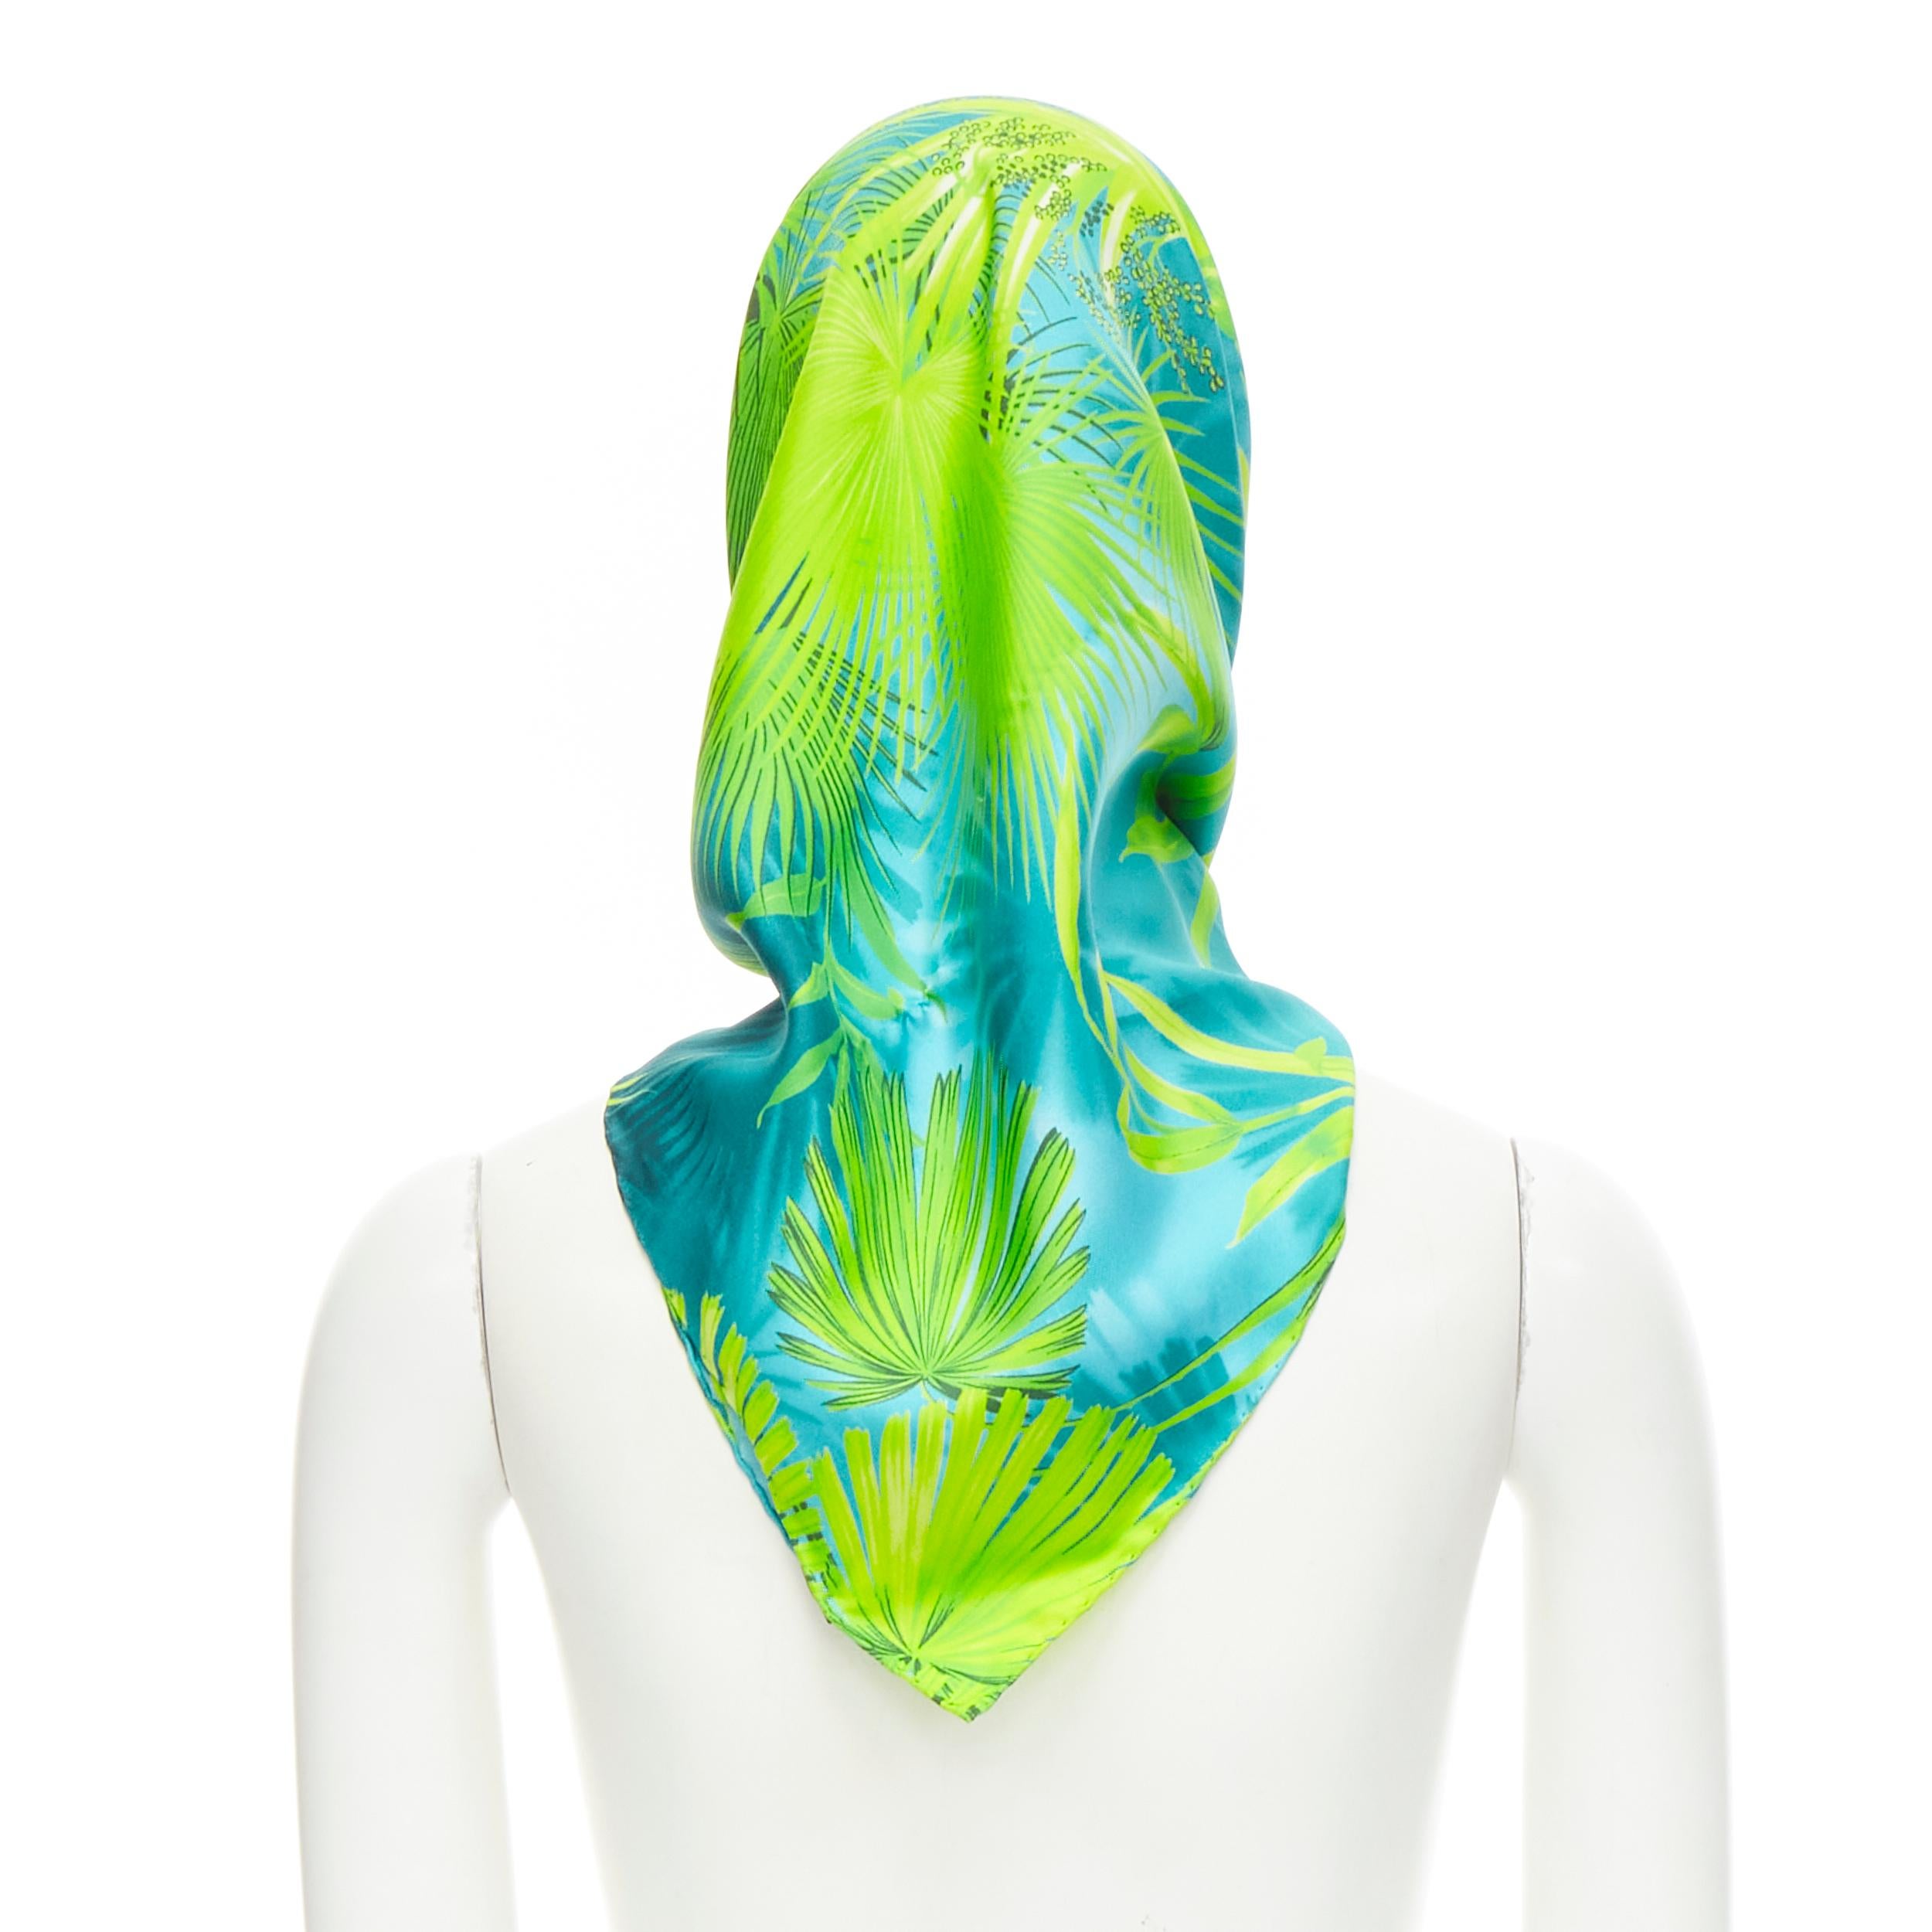 new VERSACE 100% silk 2020 Iconic green Jungle 90cm square scarf Jennifer Lopez 
Reference: TGAS/C00565 
Brand: Versace 
Designer: Donatella Versace 
Collection: 2020 
Material: Silk 
Color: Green 
Pattern: Floral 
Extra Detail: 90 x 90cm. Can be